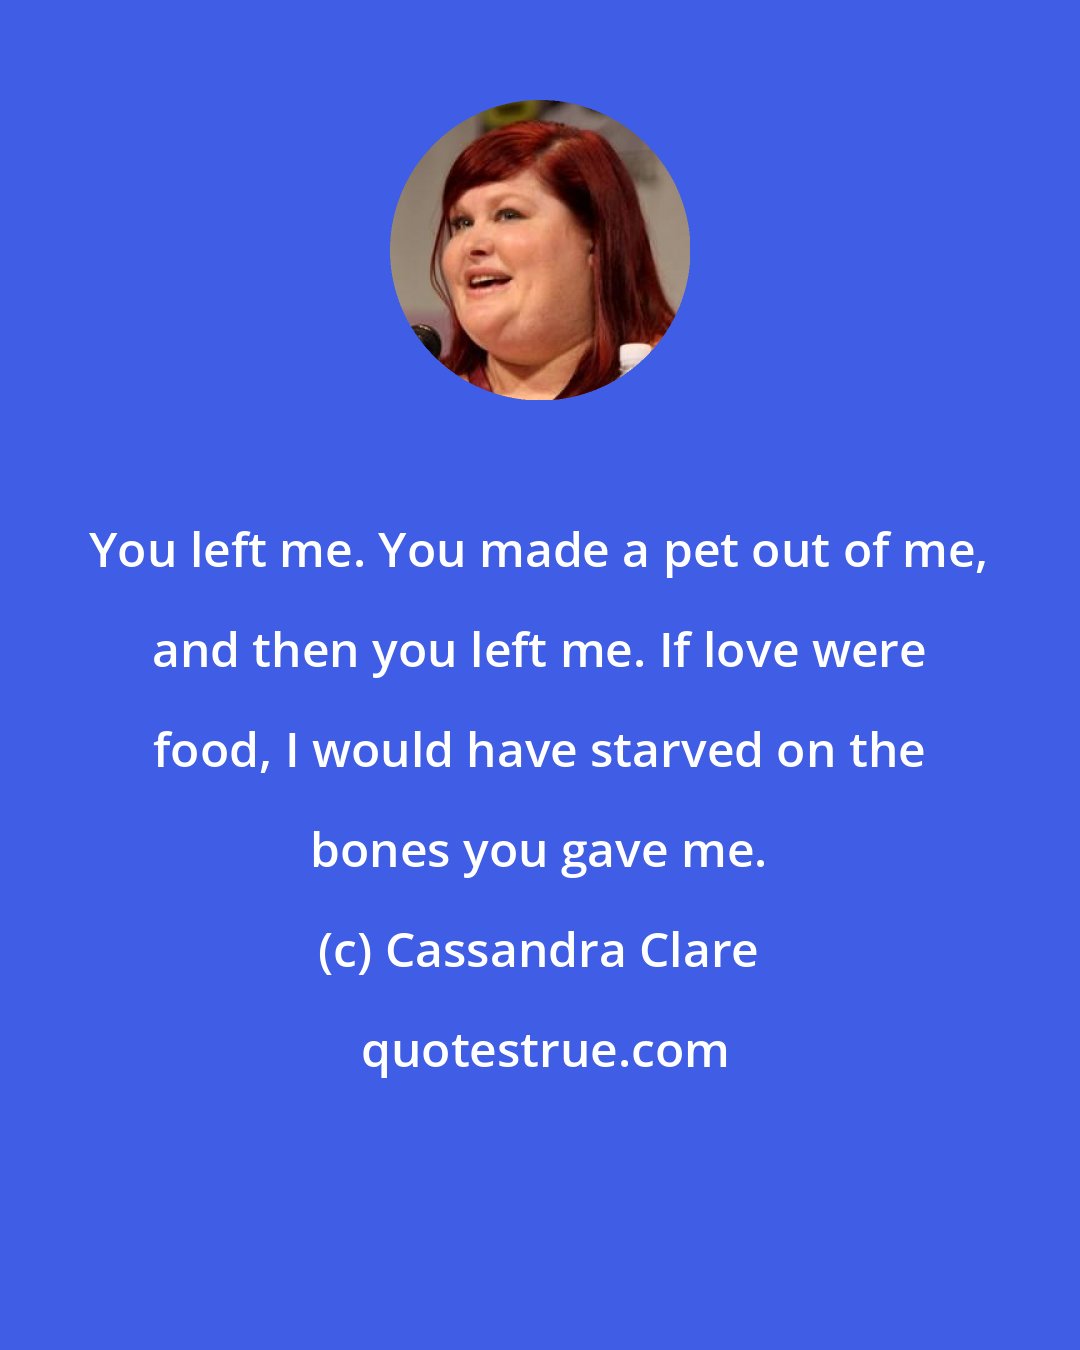 Cassandra Clare: You left me. You made a pet out of me, and then you left me. If love were food, I would have starved on the bones you gave me.